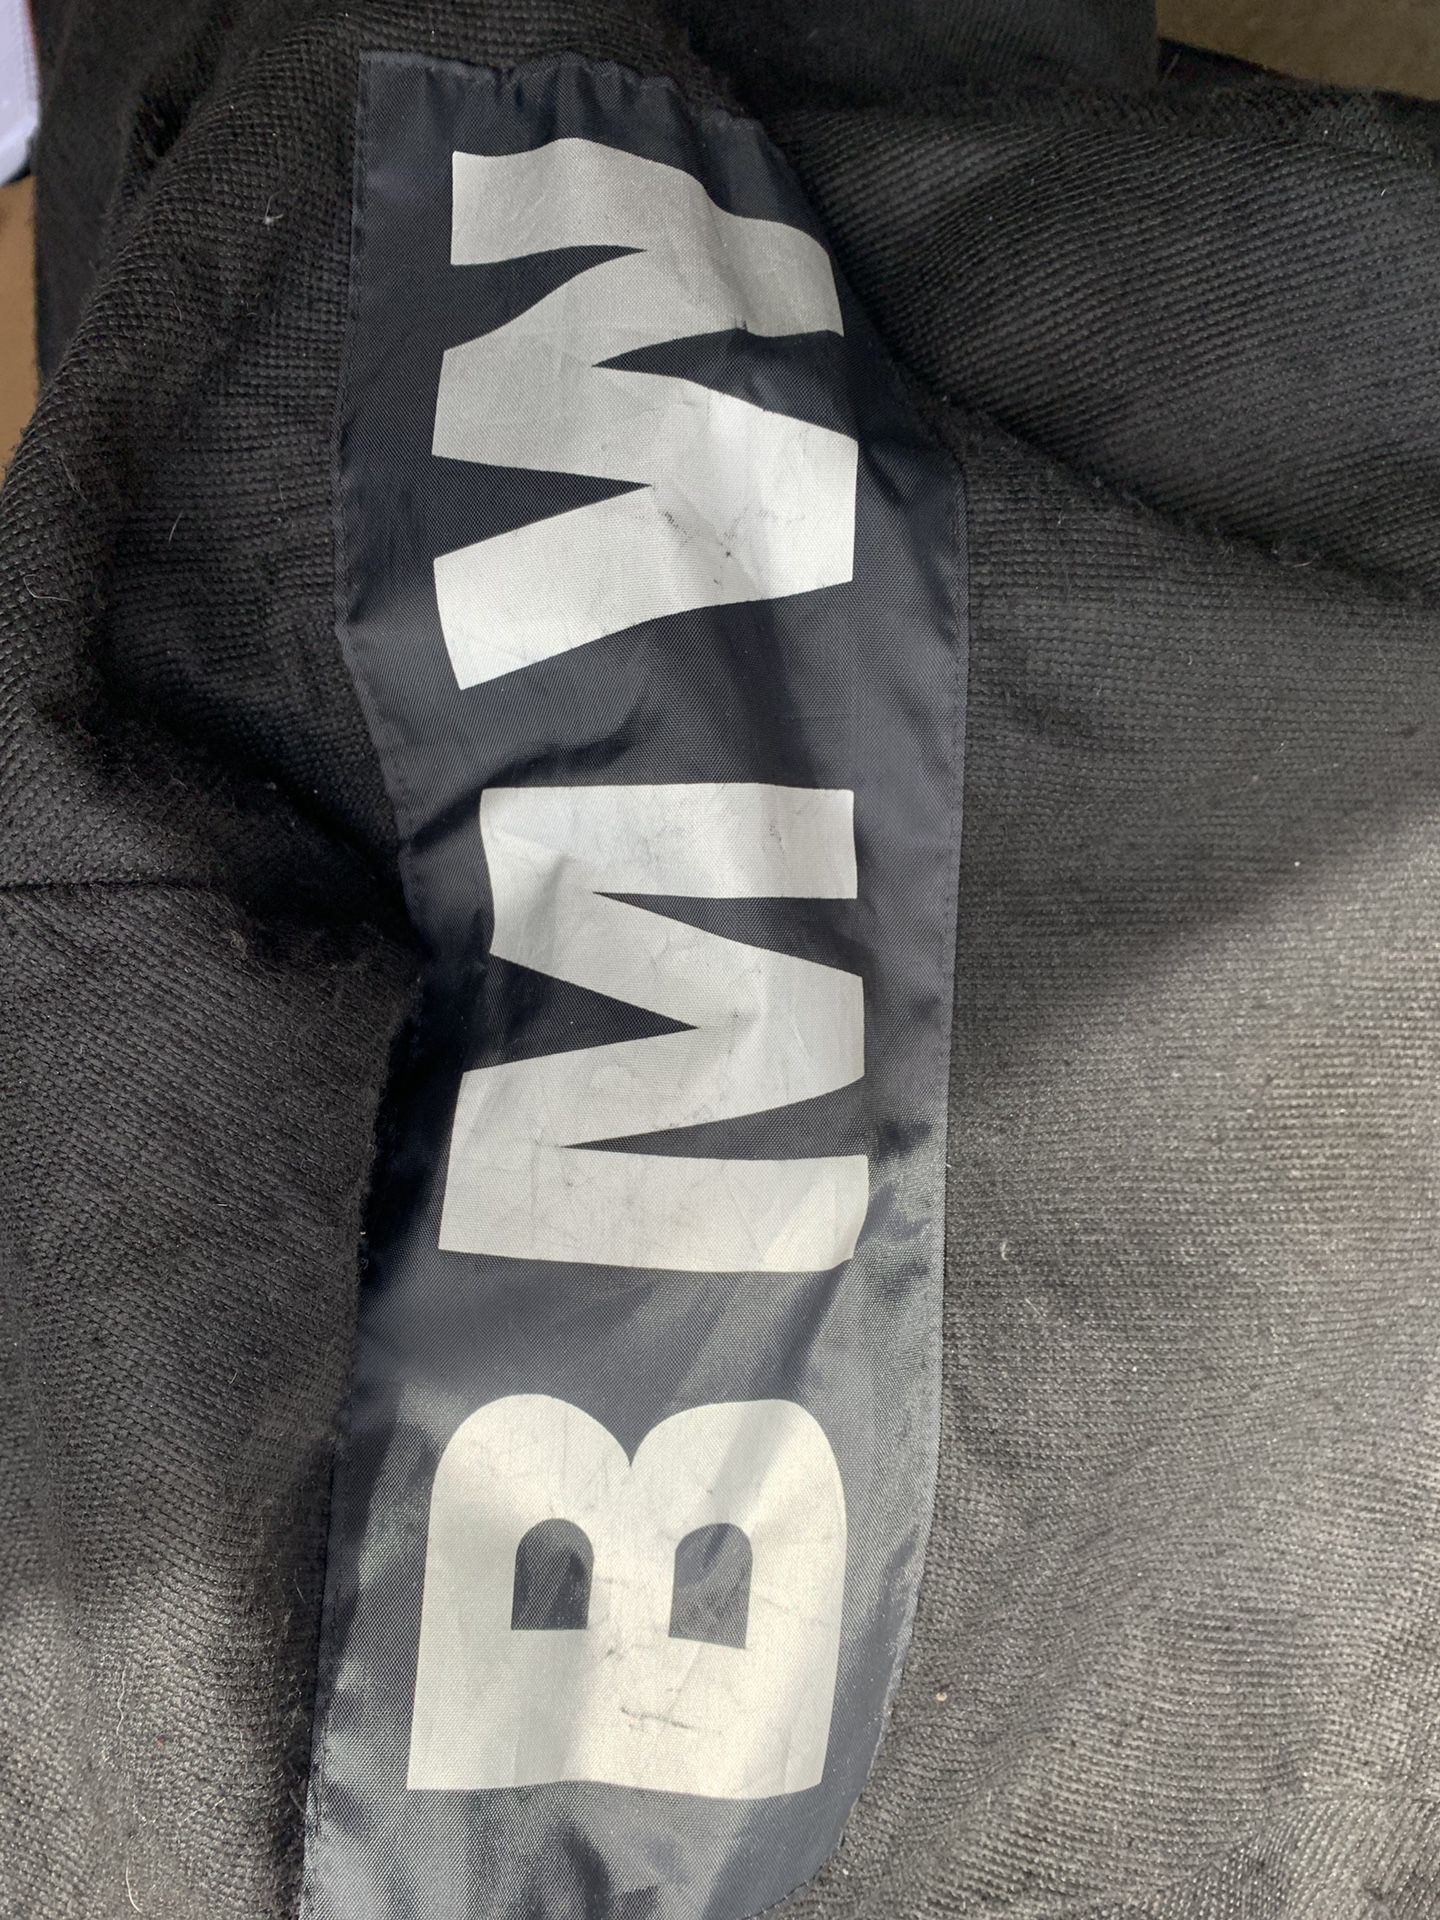 BMW Motorcycle Cover